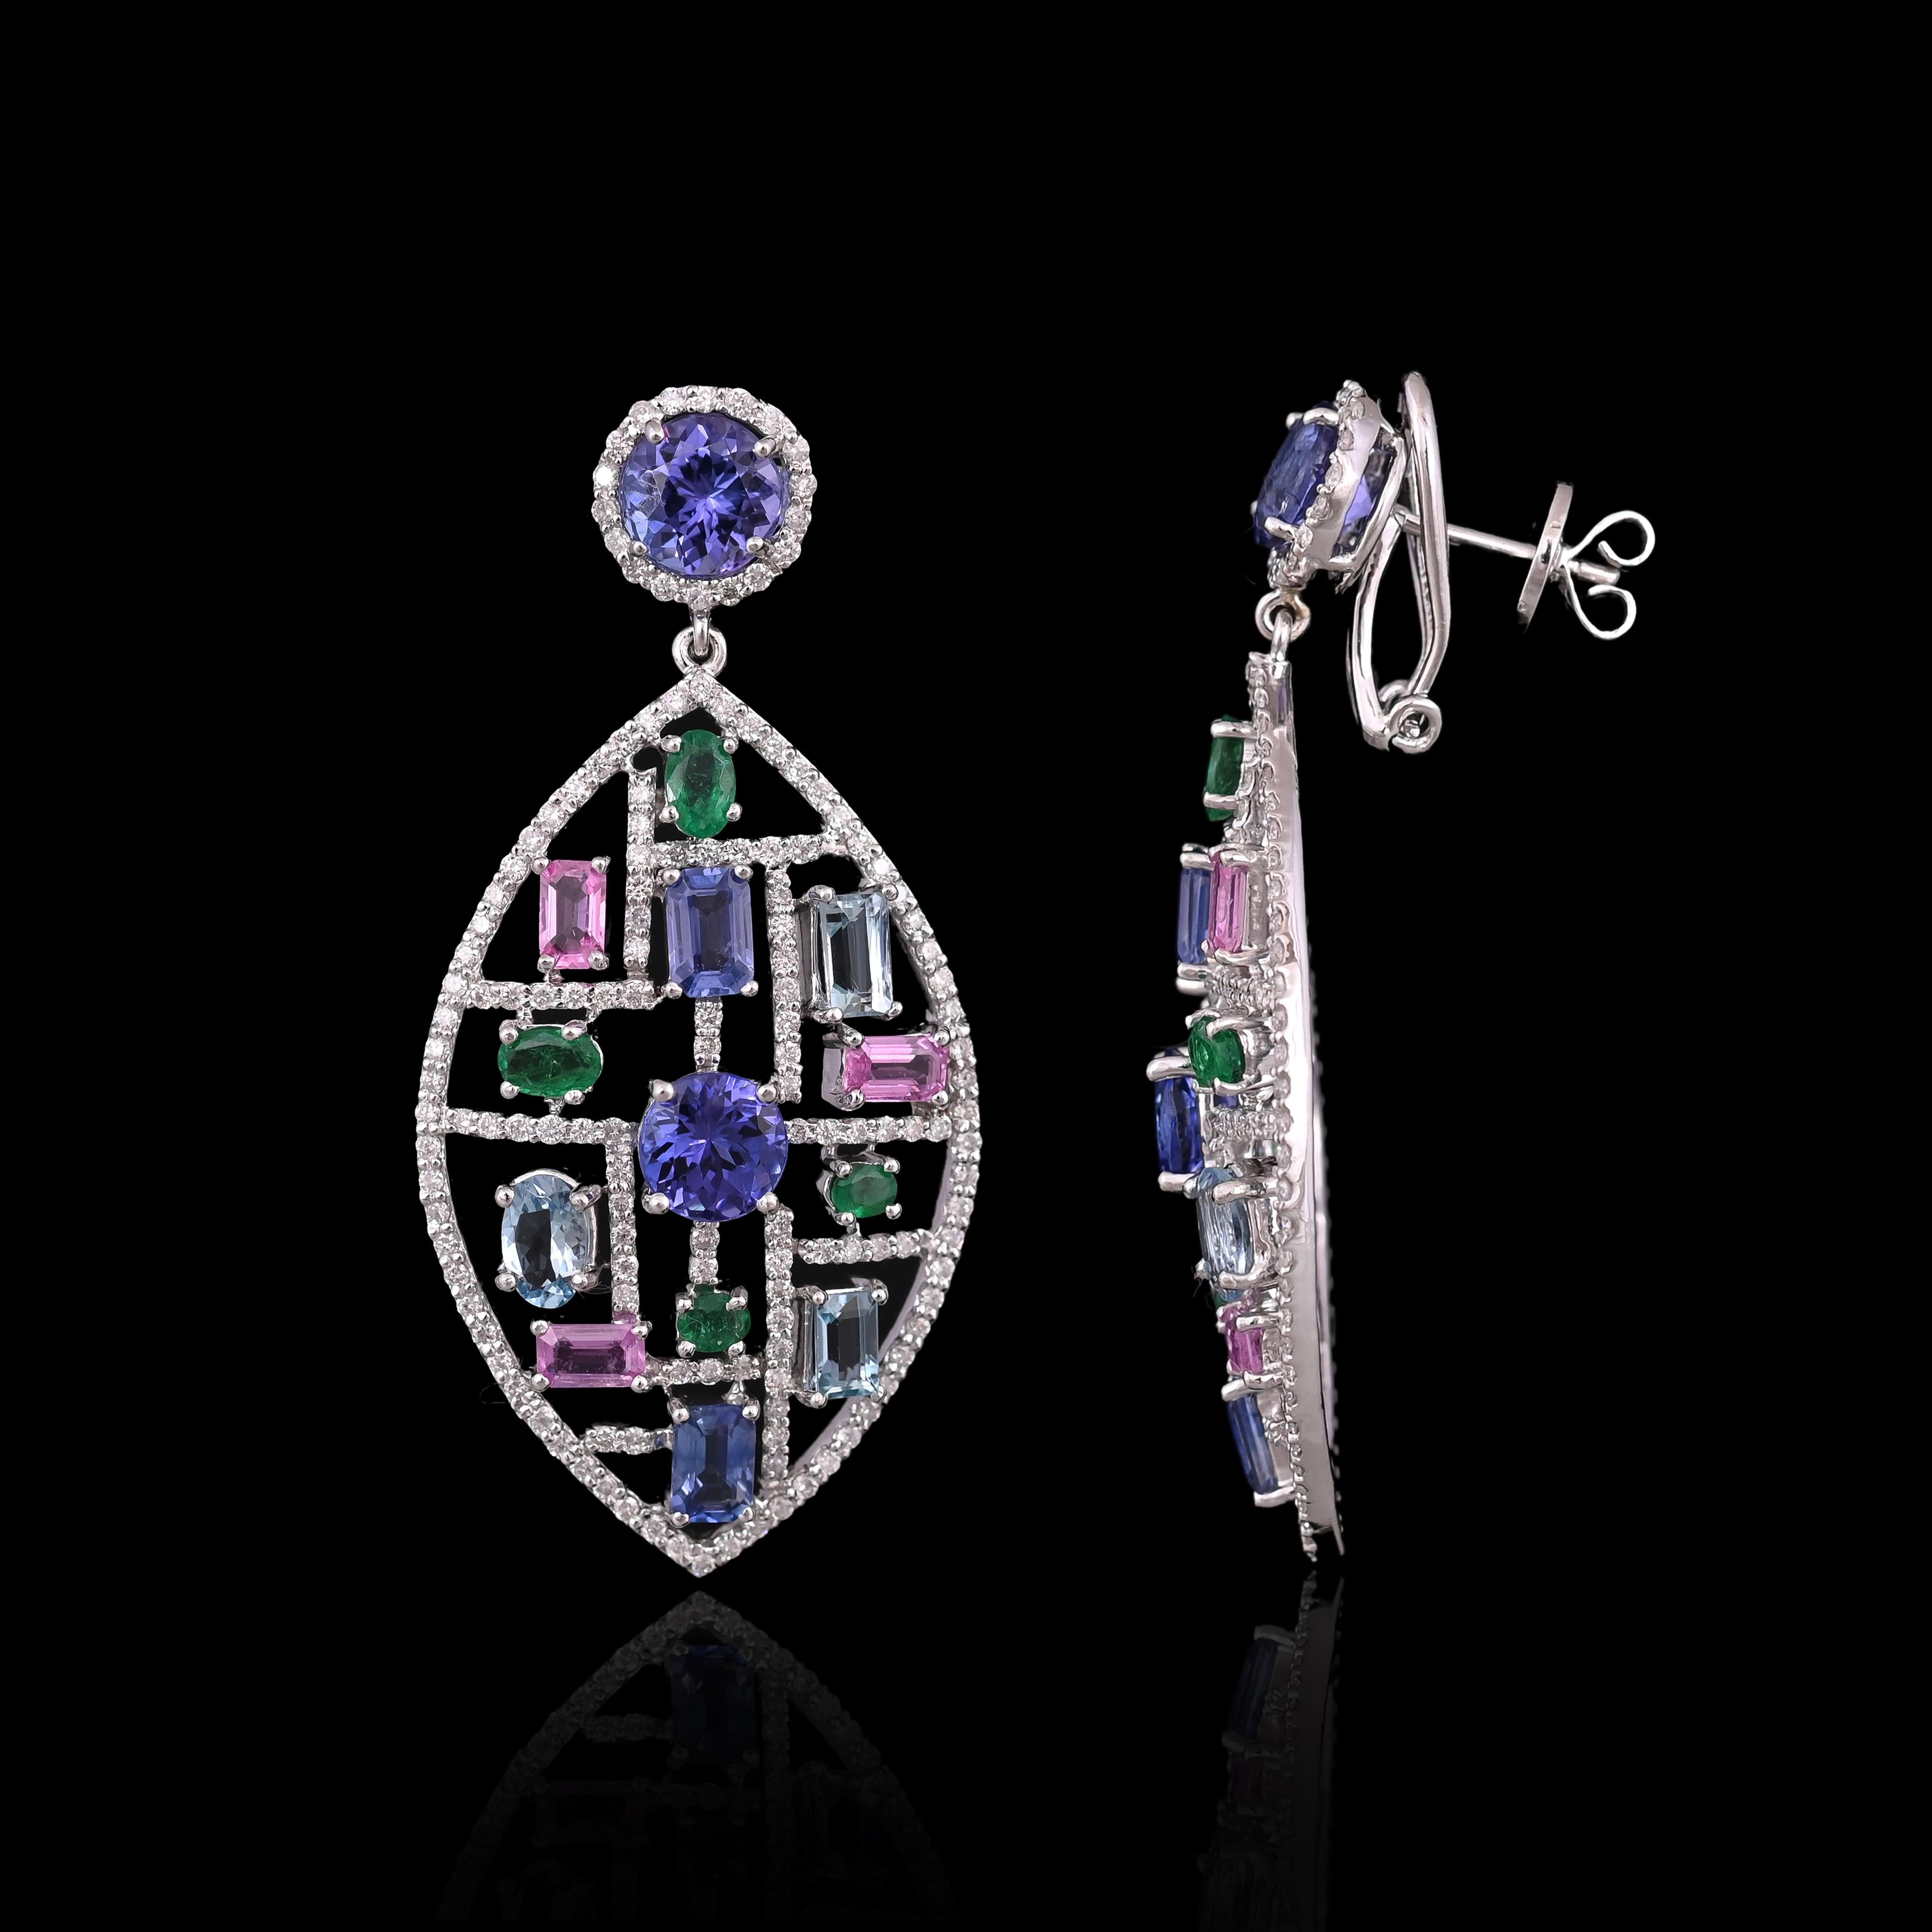 A very beautiful and gorgeous, Multi Sapphire Chandelier Earrings set in 18K White Gold & Diamonds. The weight of the Multi Sapphires is 13.89 carats. The mixed shape Multi Sapphires are of Ceylon (Sri Lanka) origin. The weigh of the Diamonds is